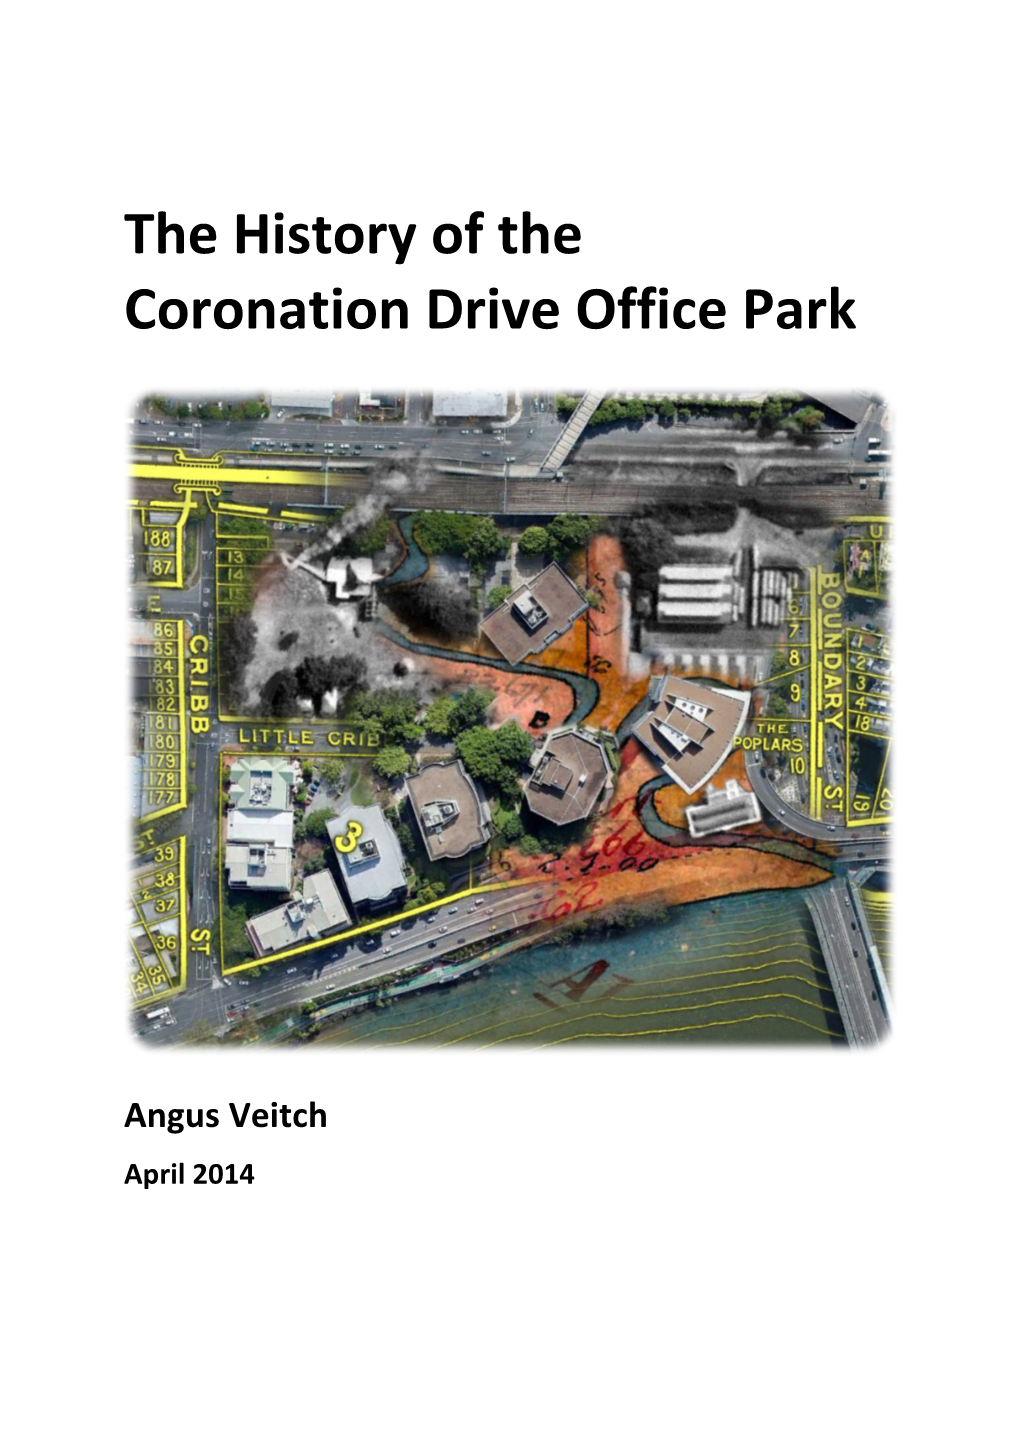 The History of the Coronation Drive Office Park